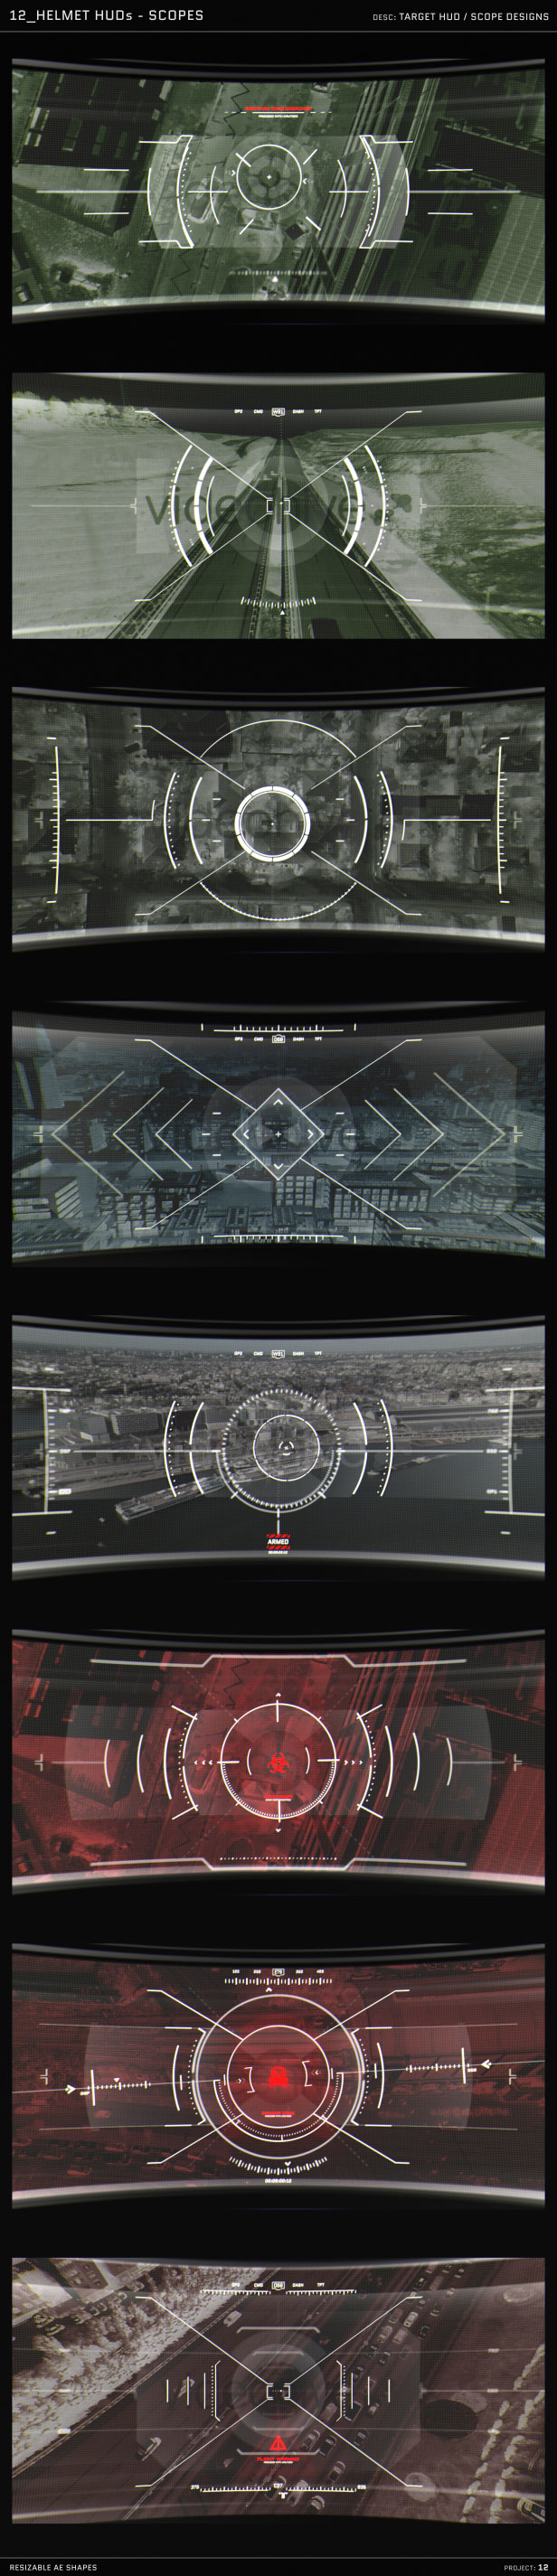 HUD - UI Graphics for FILM, TV and GAMES - 14